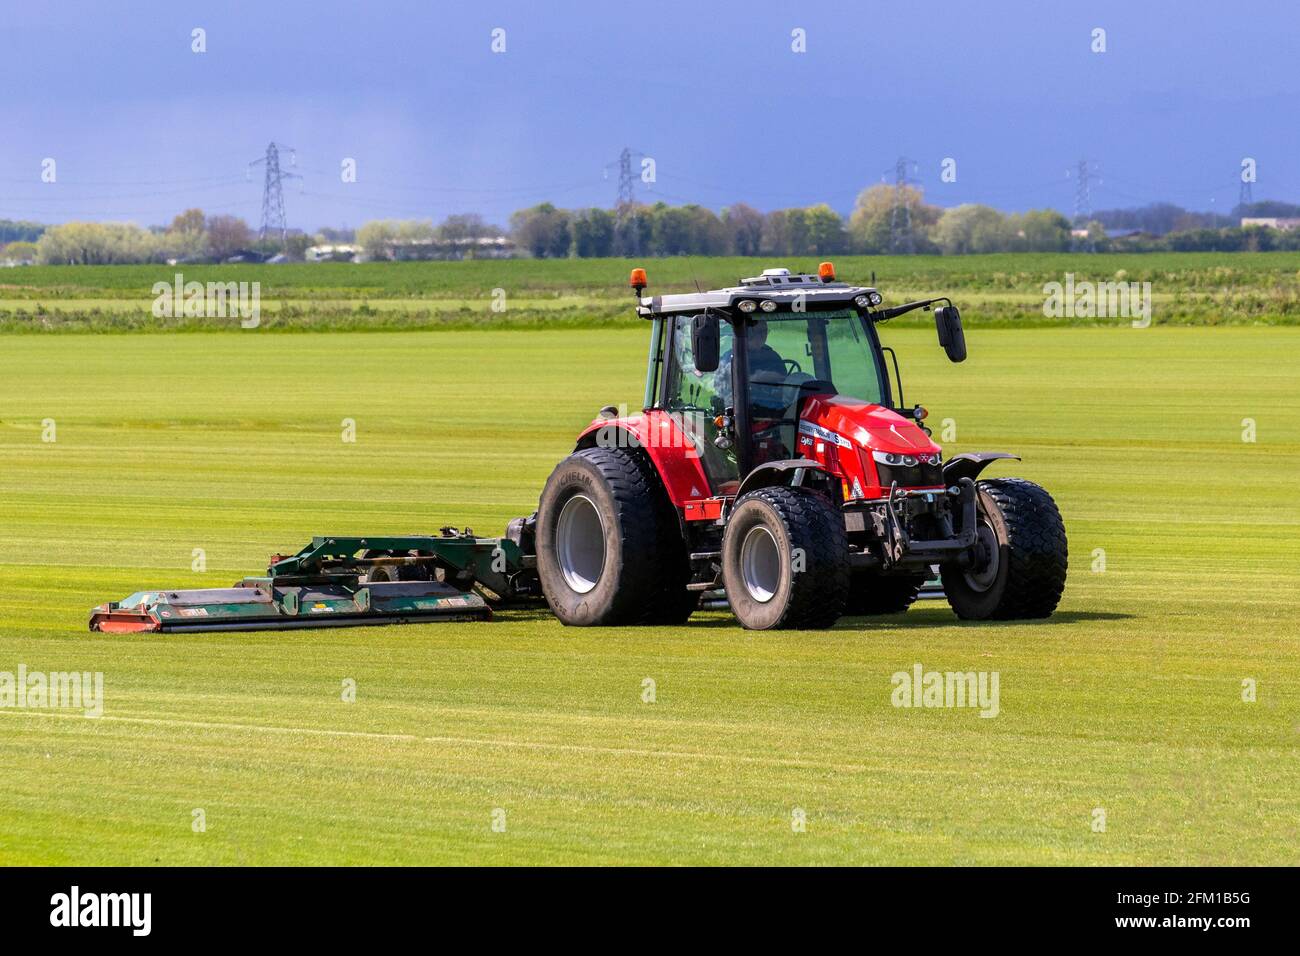 Tarleton UK Weather 5th May 2021; Bright sunny start to the day for commerical turf growers in Lancashire mowing grassland with the award winning Massey Ferguson farm tractor 5713;   Sod is typically used for lawns, golf courses, and new housing around the world. In residential construction, it is sold to landscapers, home builders or home owners who use it to establish a lawn quickly and avoid soil erosion. Credit MediaWorldImages/AlamyLiveNews Stock Photo